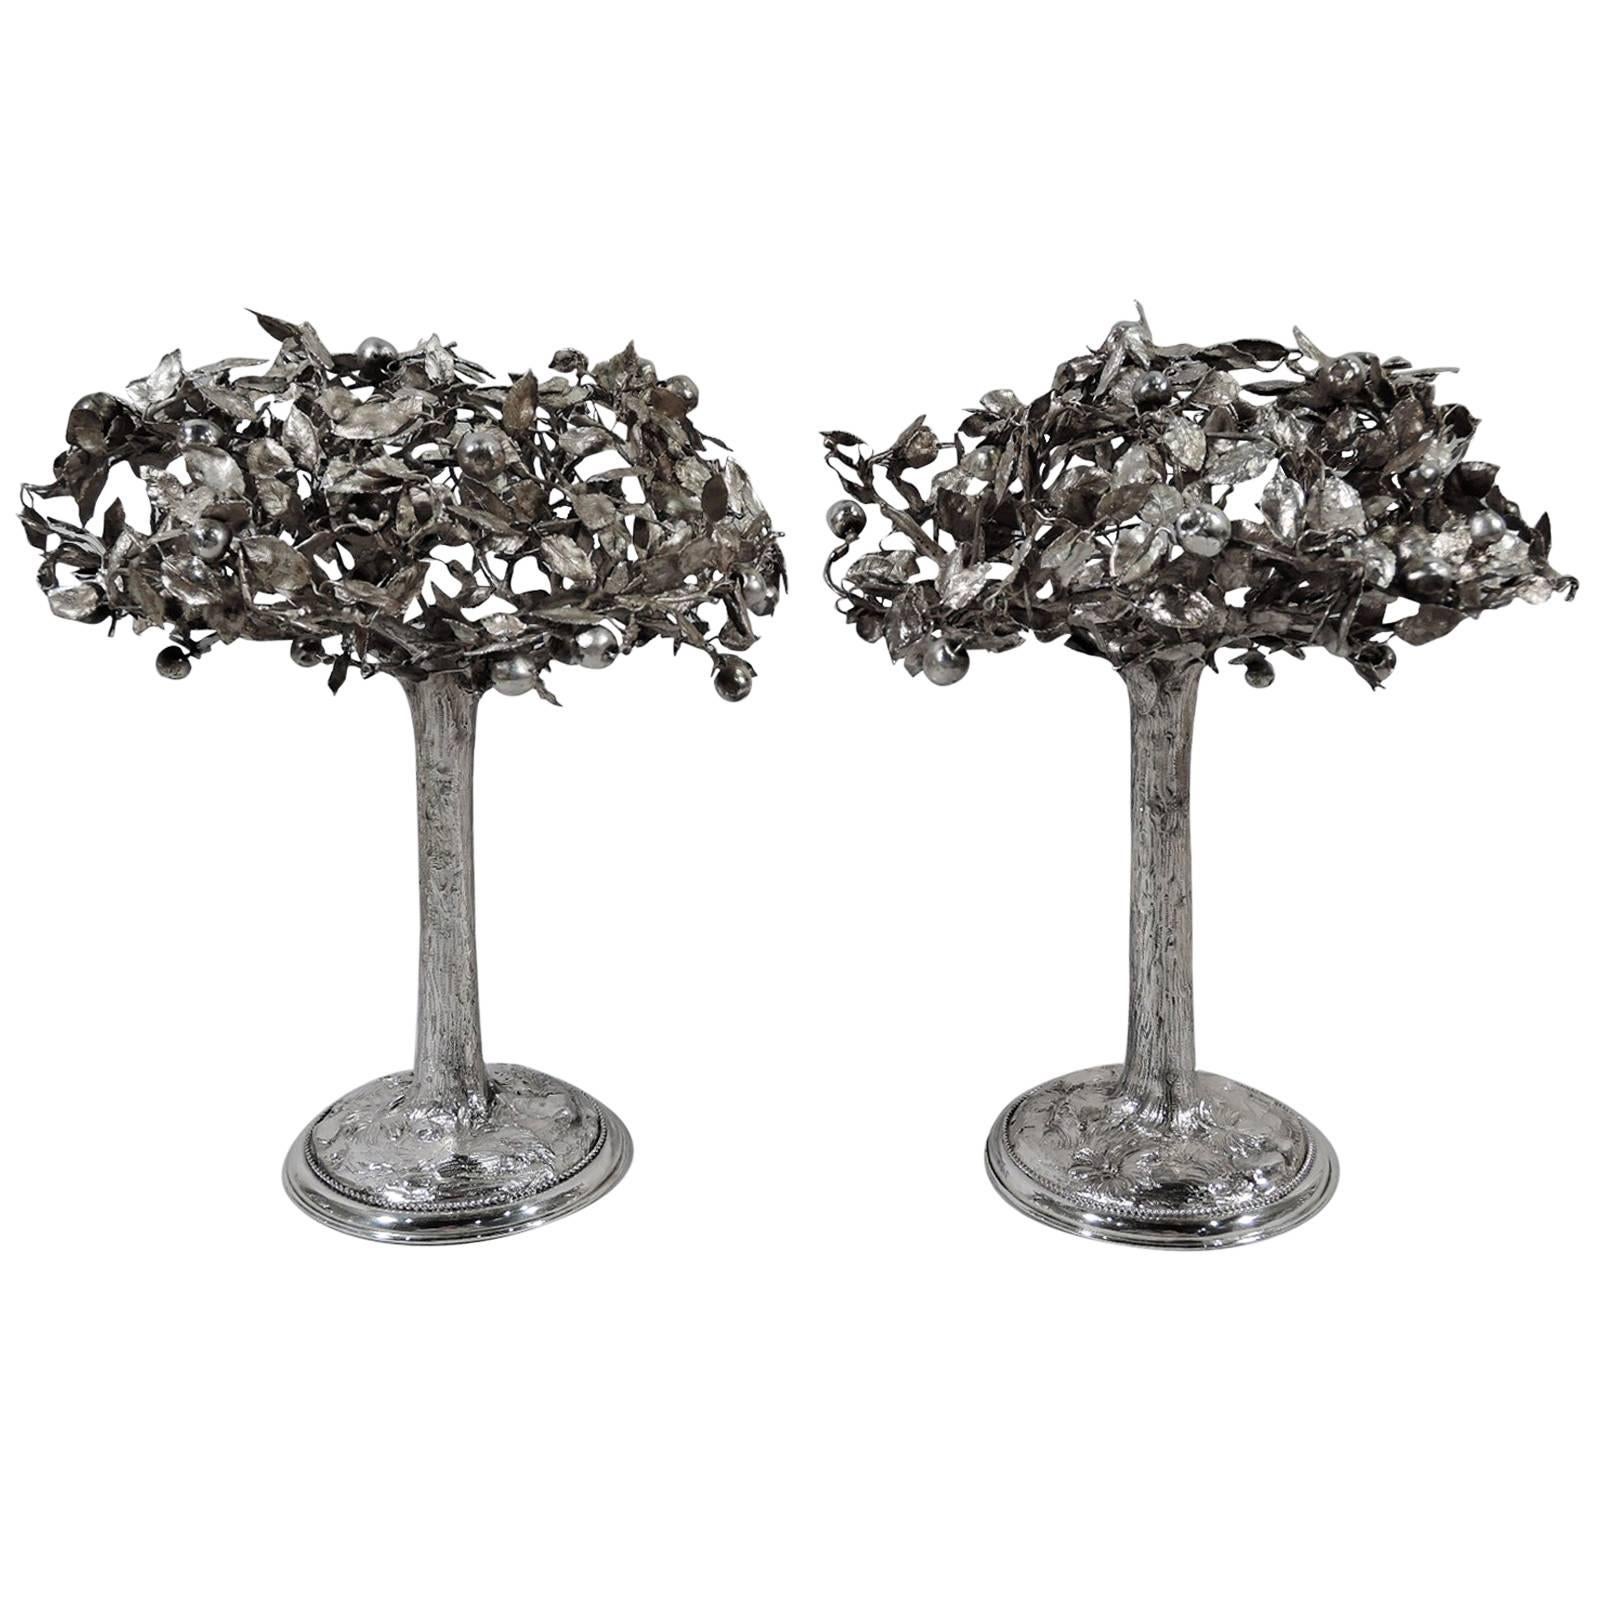 Pair of Antique German Silver Apple Trees from Joan Rivers Estate